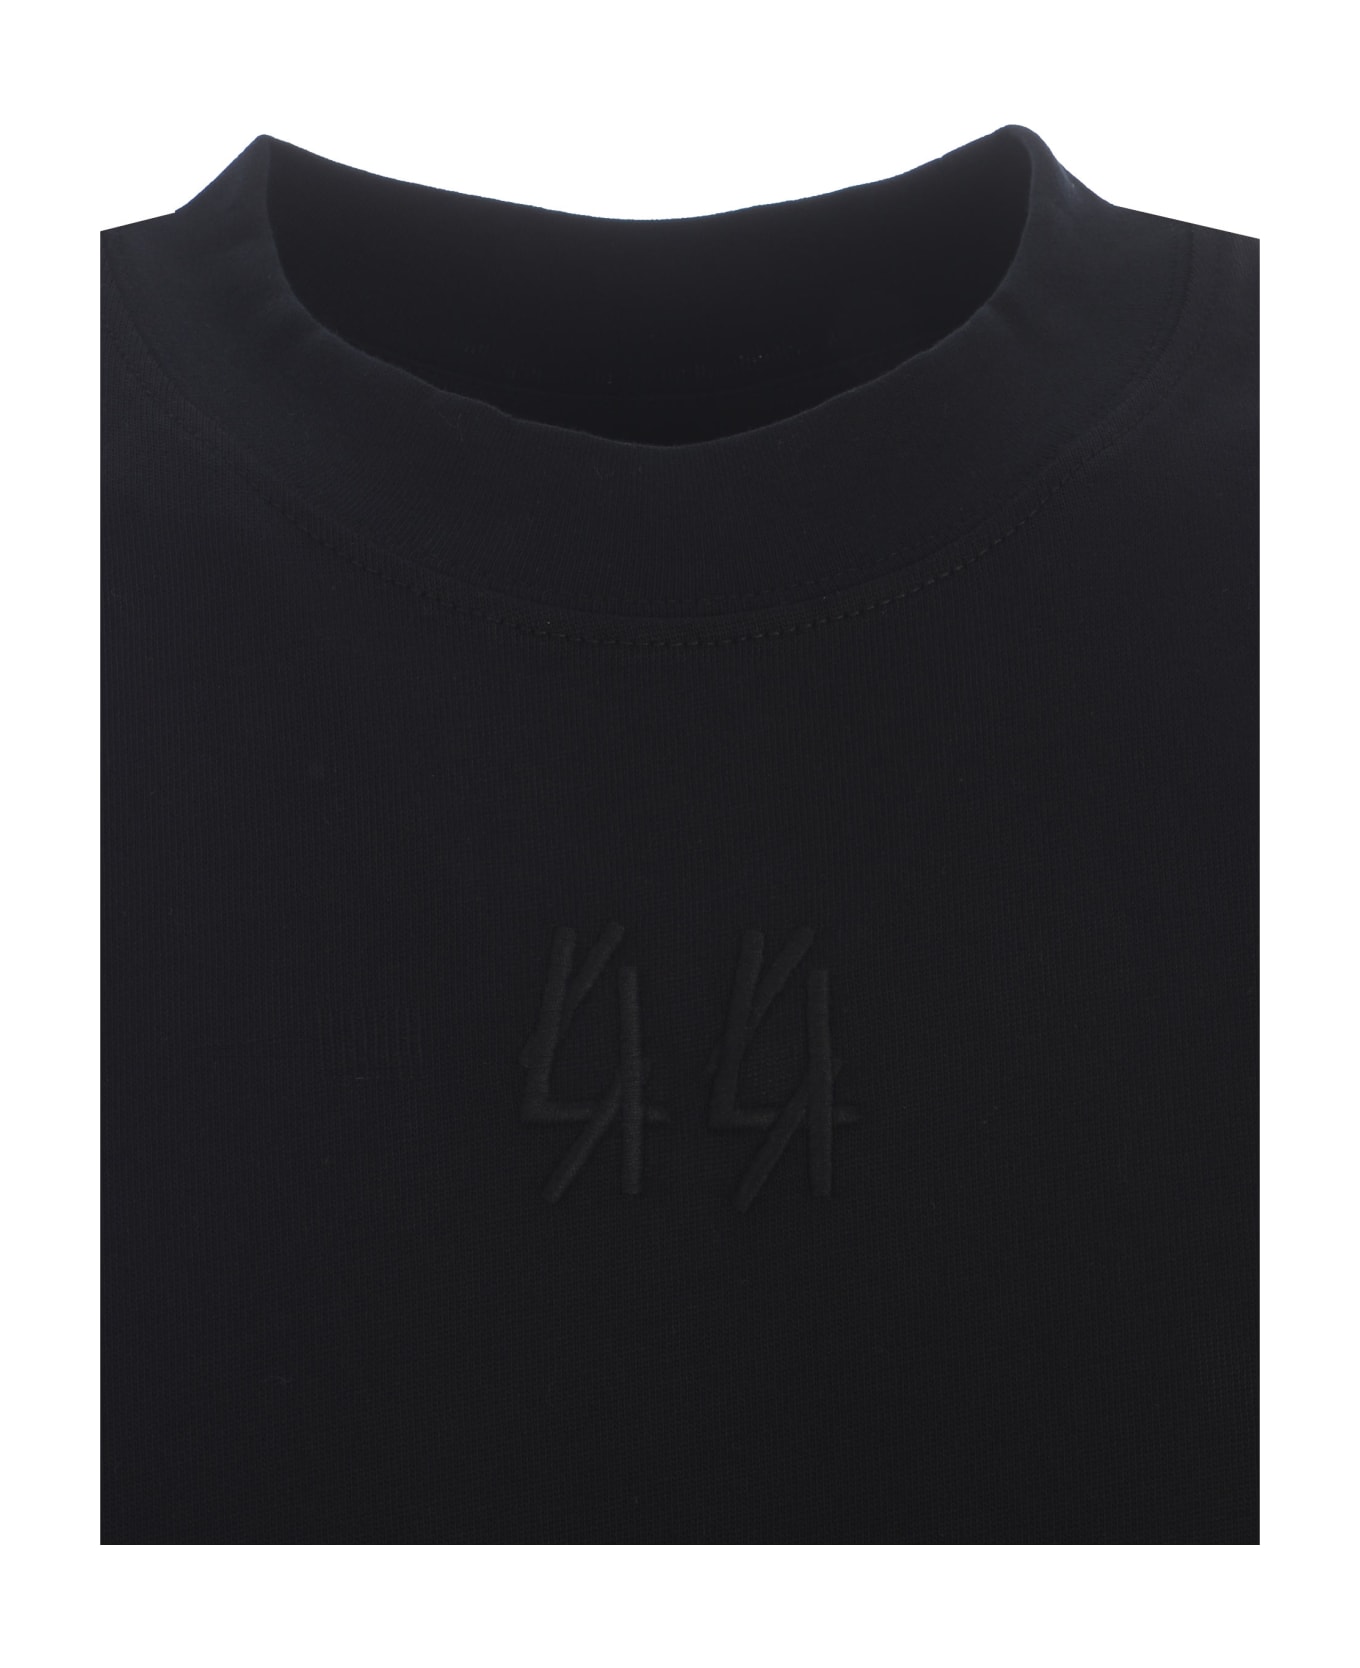 44 Label Group T-shirt 44label Group Made Of Cotton - Nero シャツ